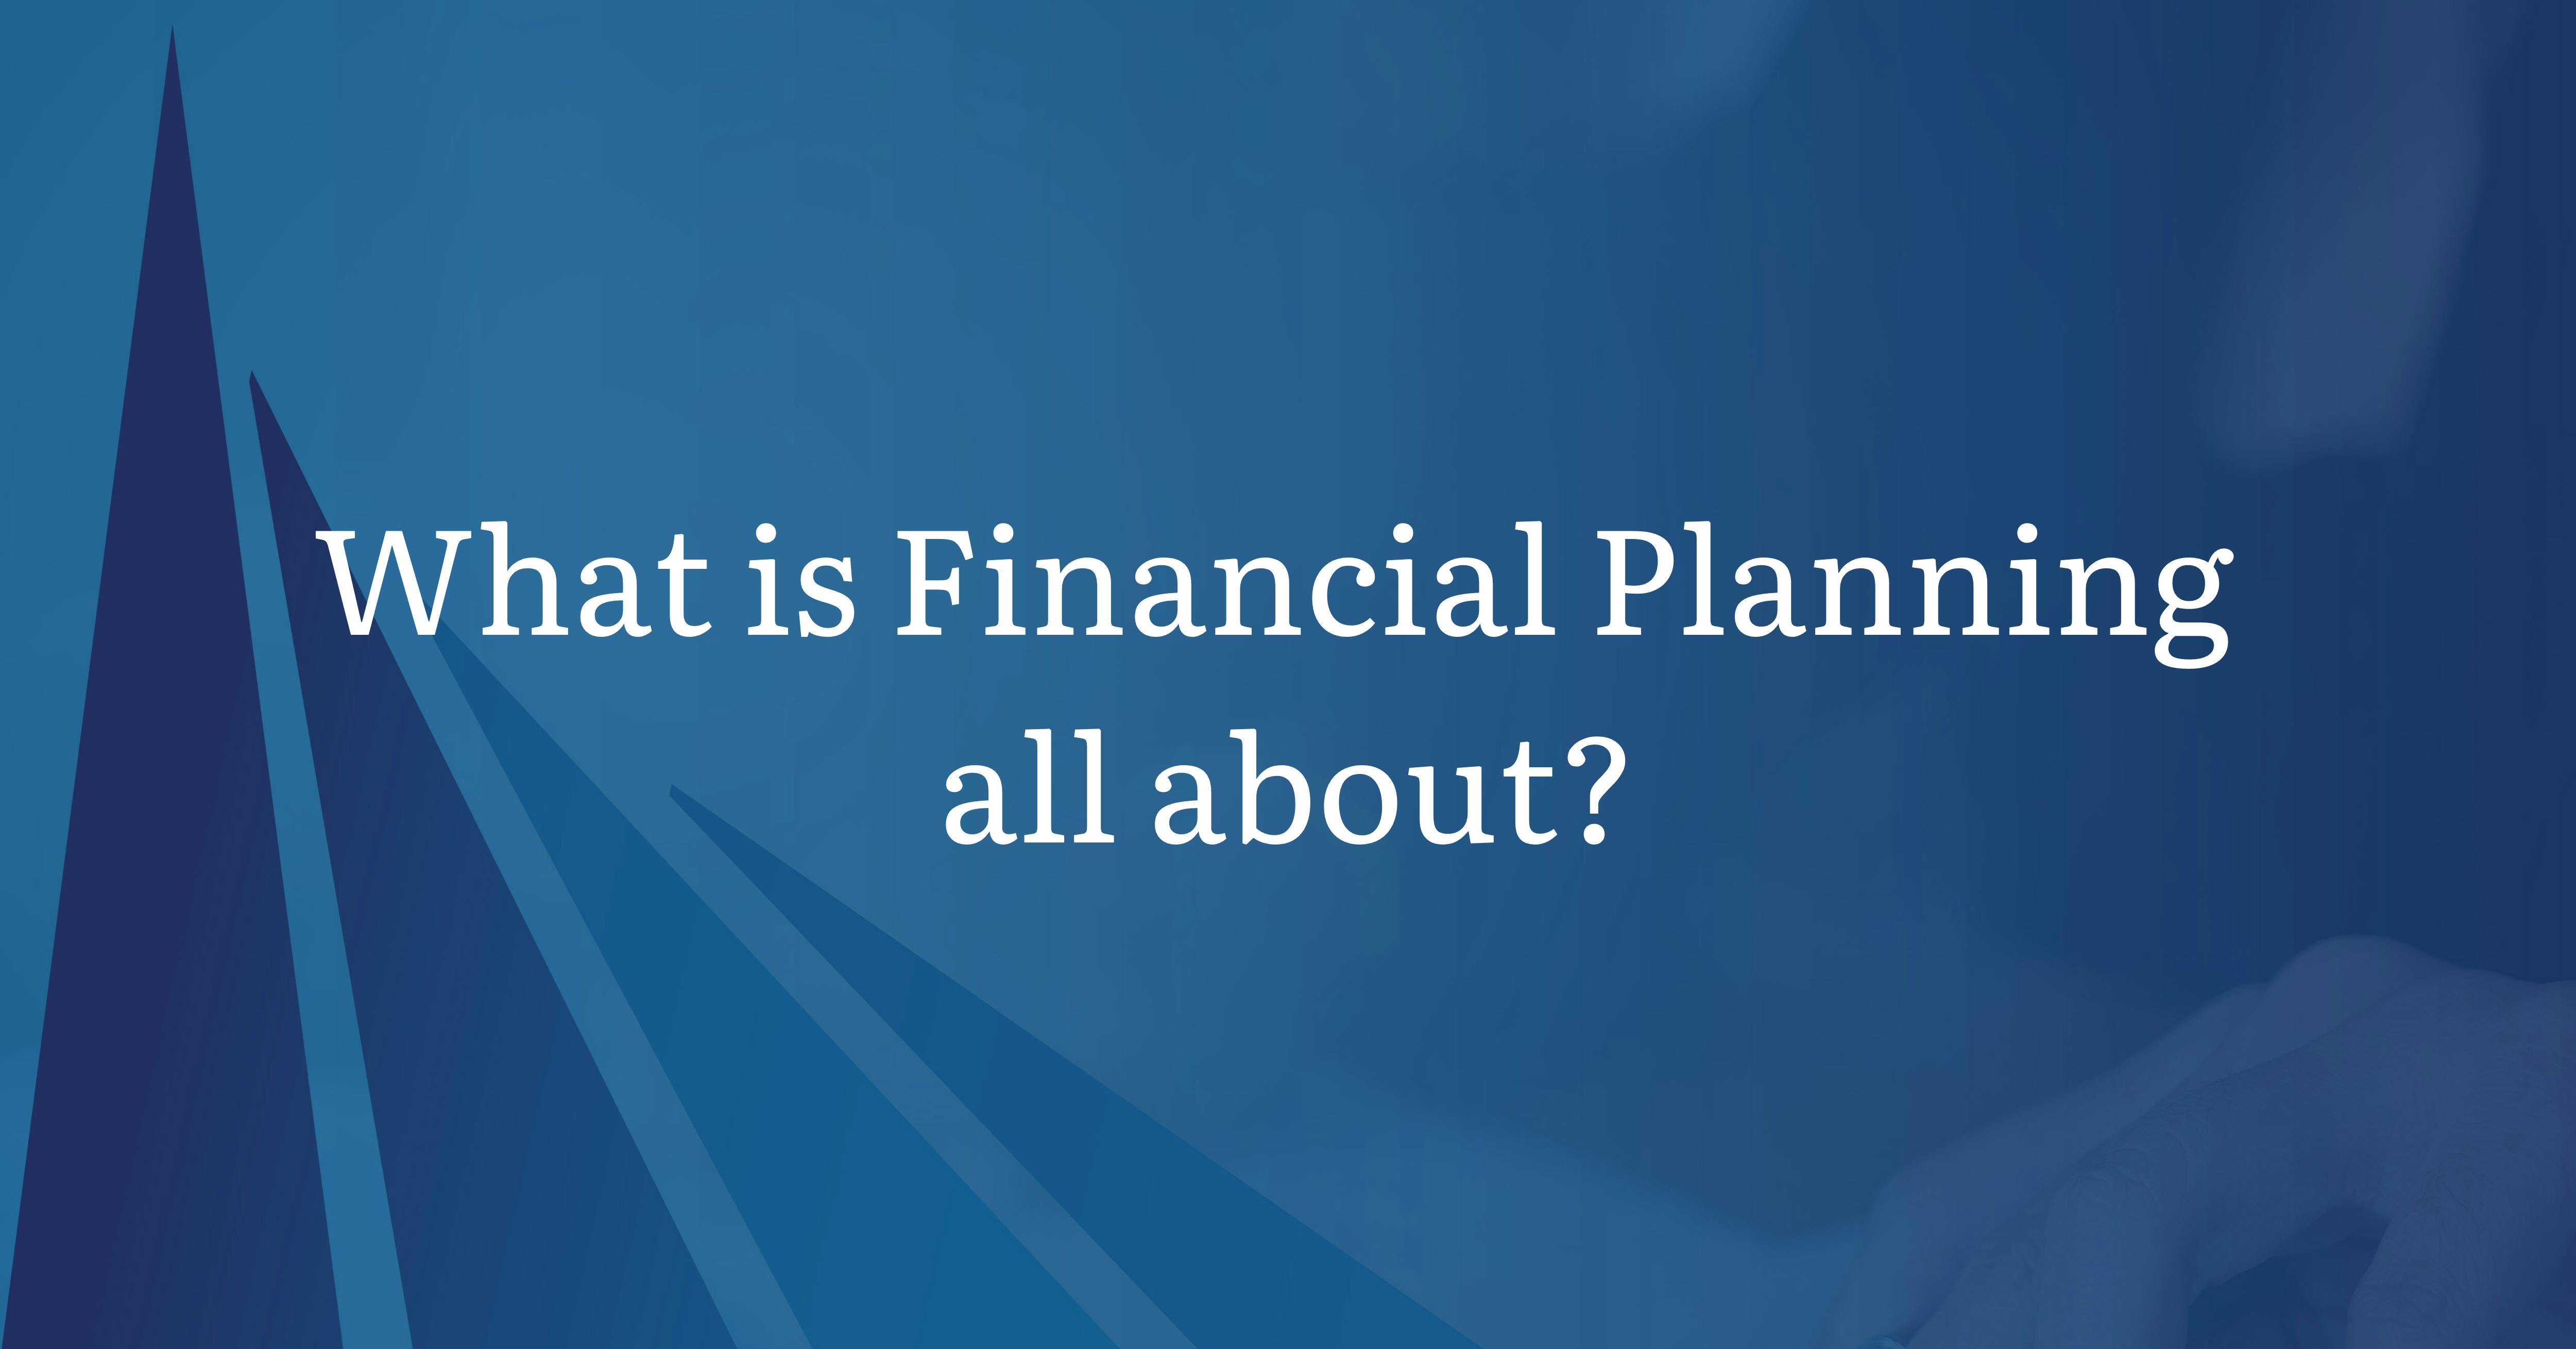 What is Financial Planning all about?